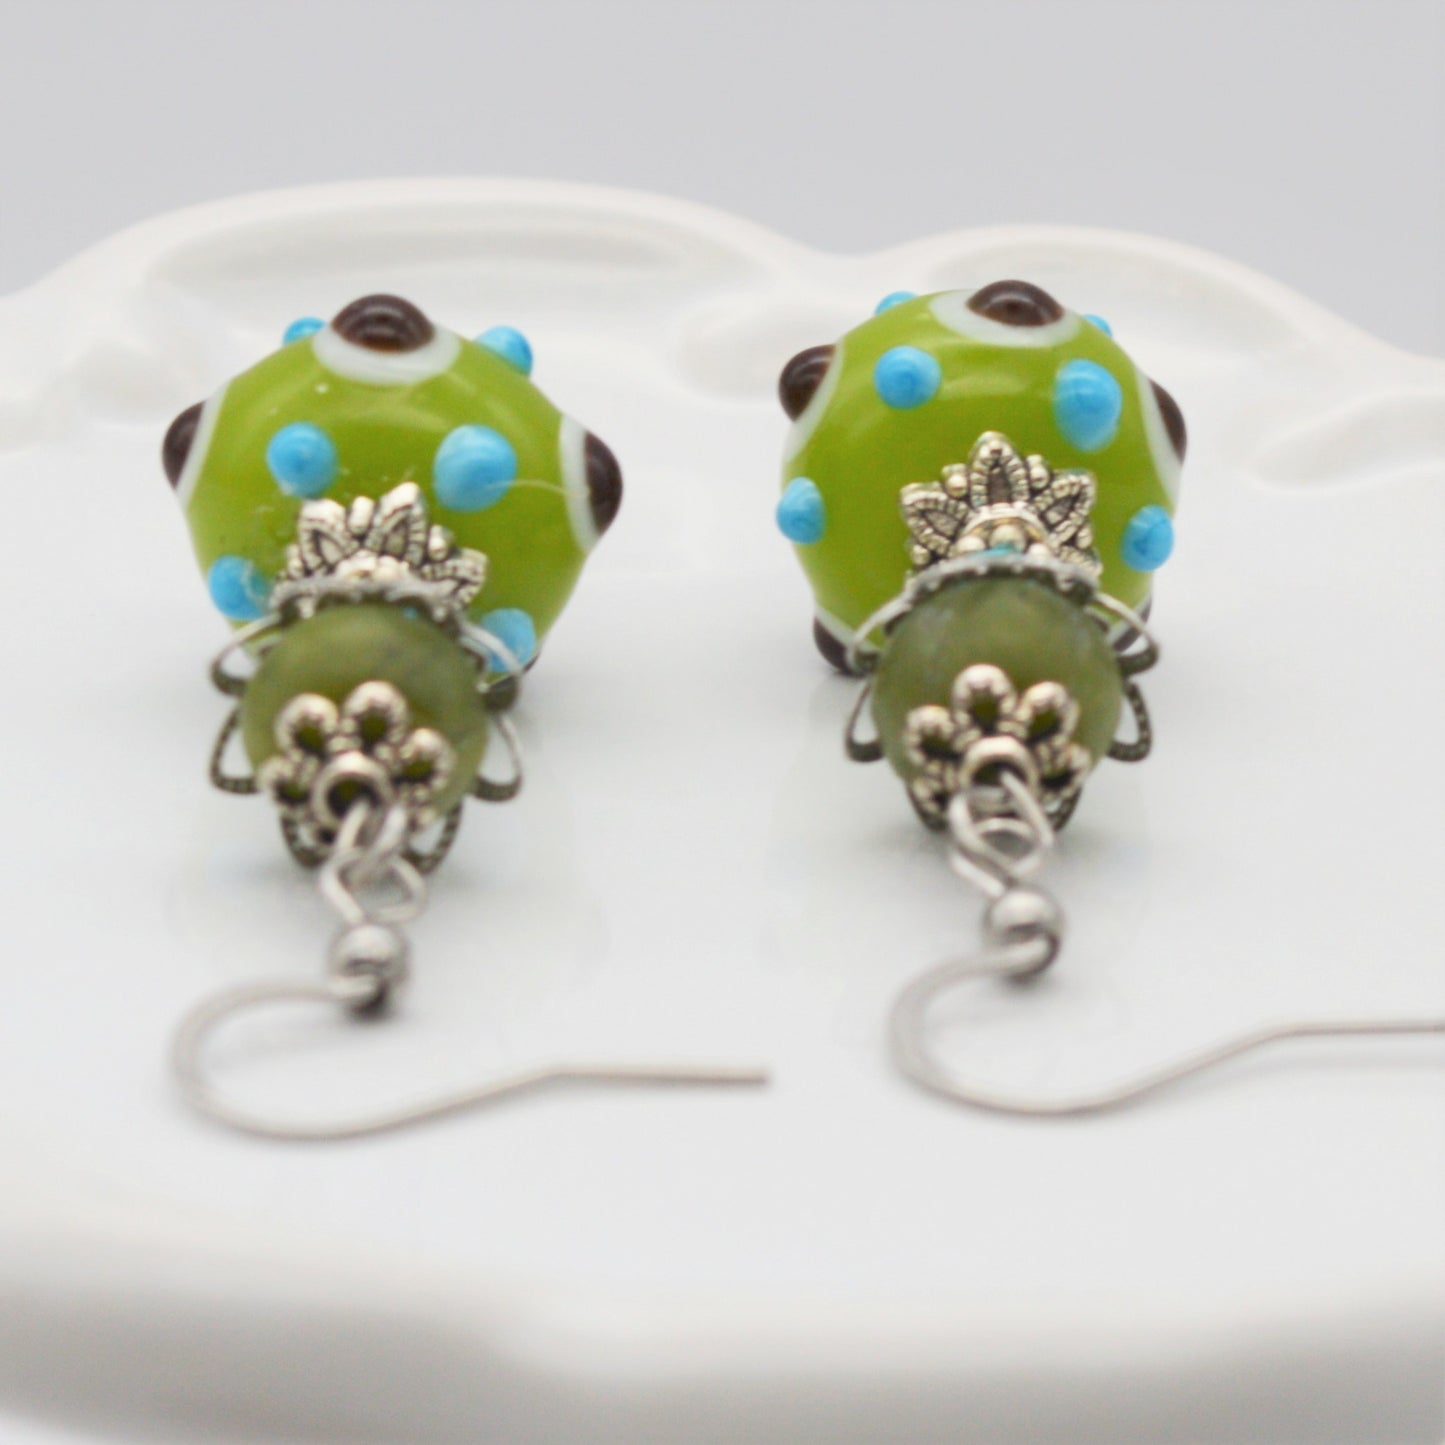 Green & Turquoise Murano Glass Earrings, Glass Beads Created in Venice,  Italy